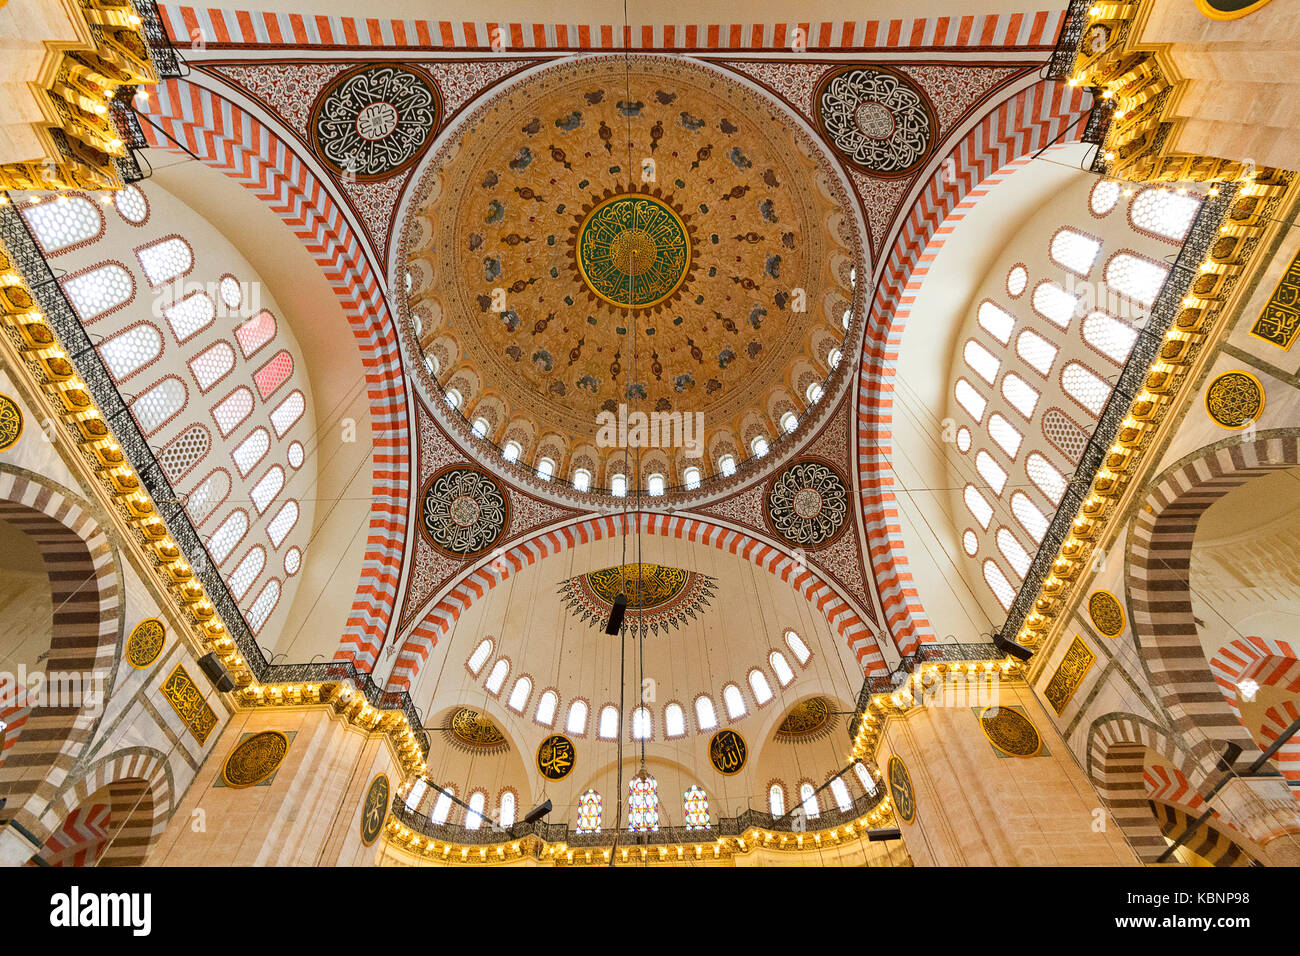 Interior of Suleymaniye Mosque, in Istanbul, Turkey, built by Sultan Suleyman the Magnificent. Stock Photo